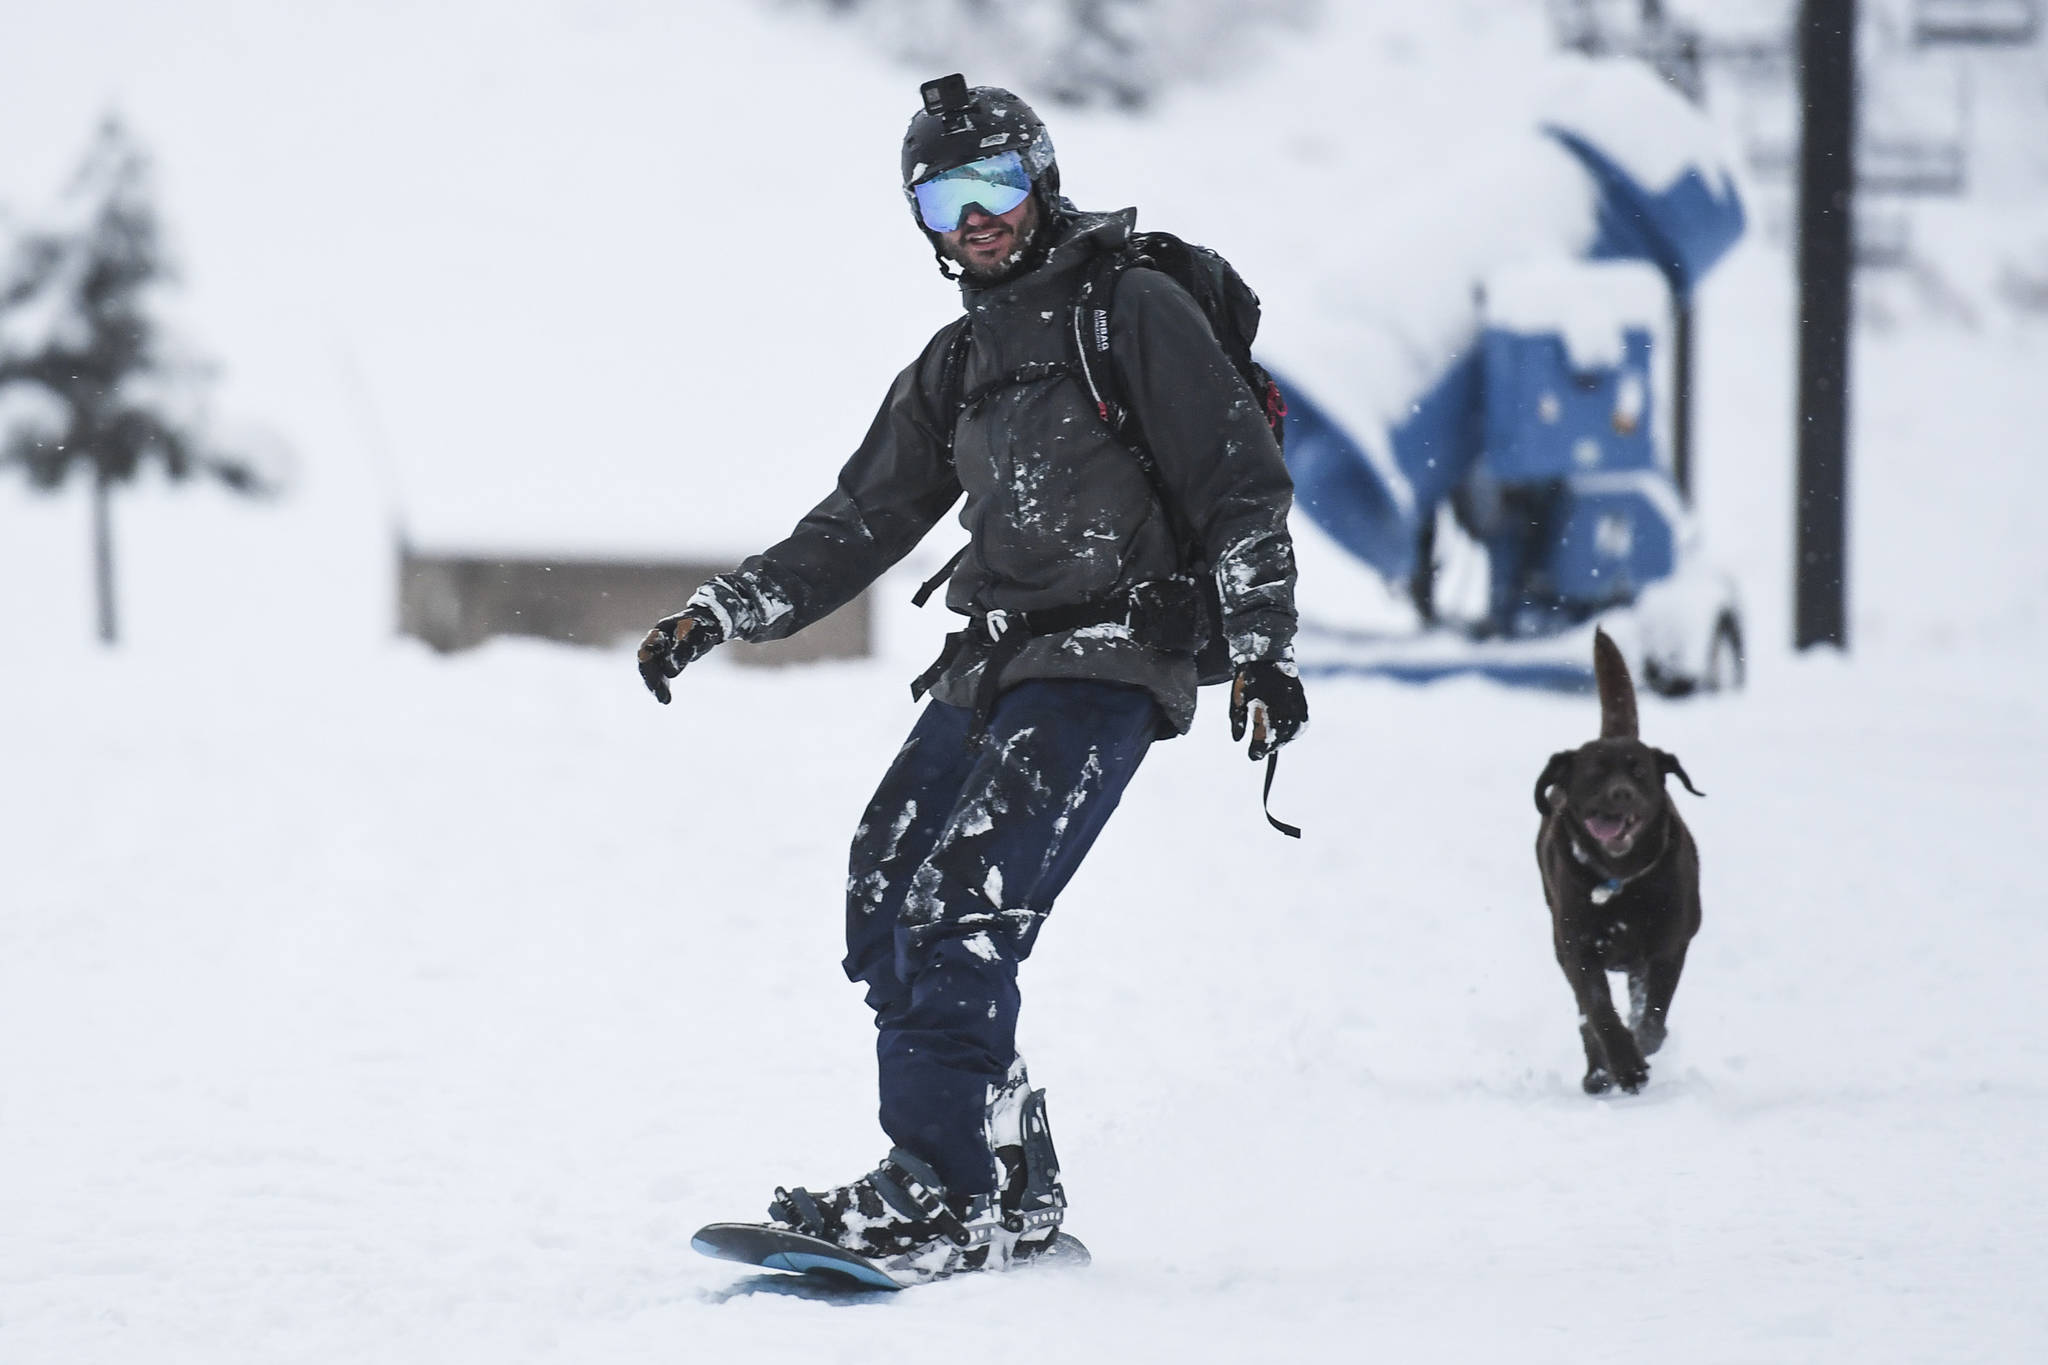 Chris Miller is followed by Izzy as he snowboards at Eaglecrest on Tuesday, Dec. 3, 2019. (Michael Penn | Juneau Empire)